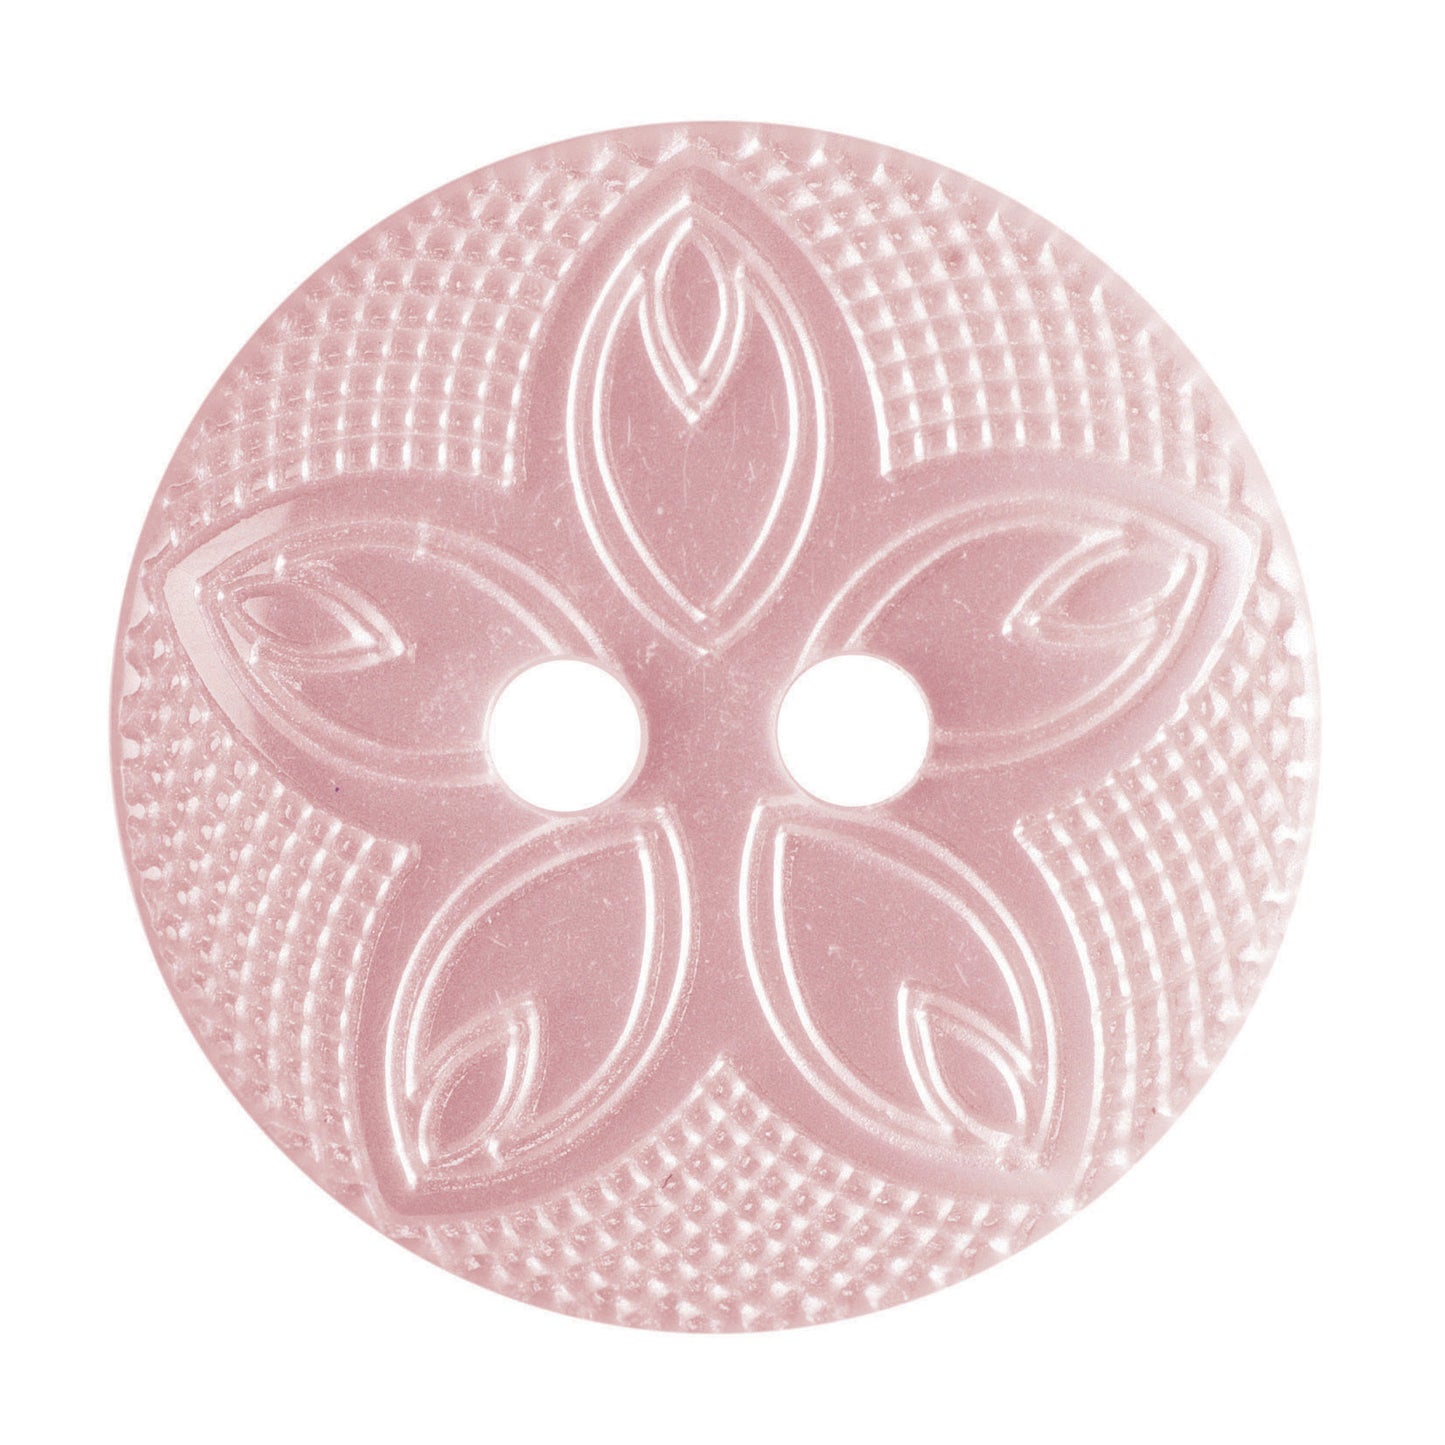 2 Hole Etched Flower Button - 15mm - Pink [LH28.5]